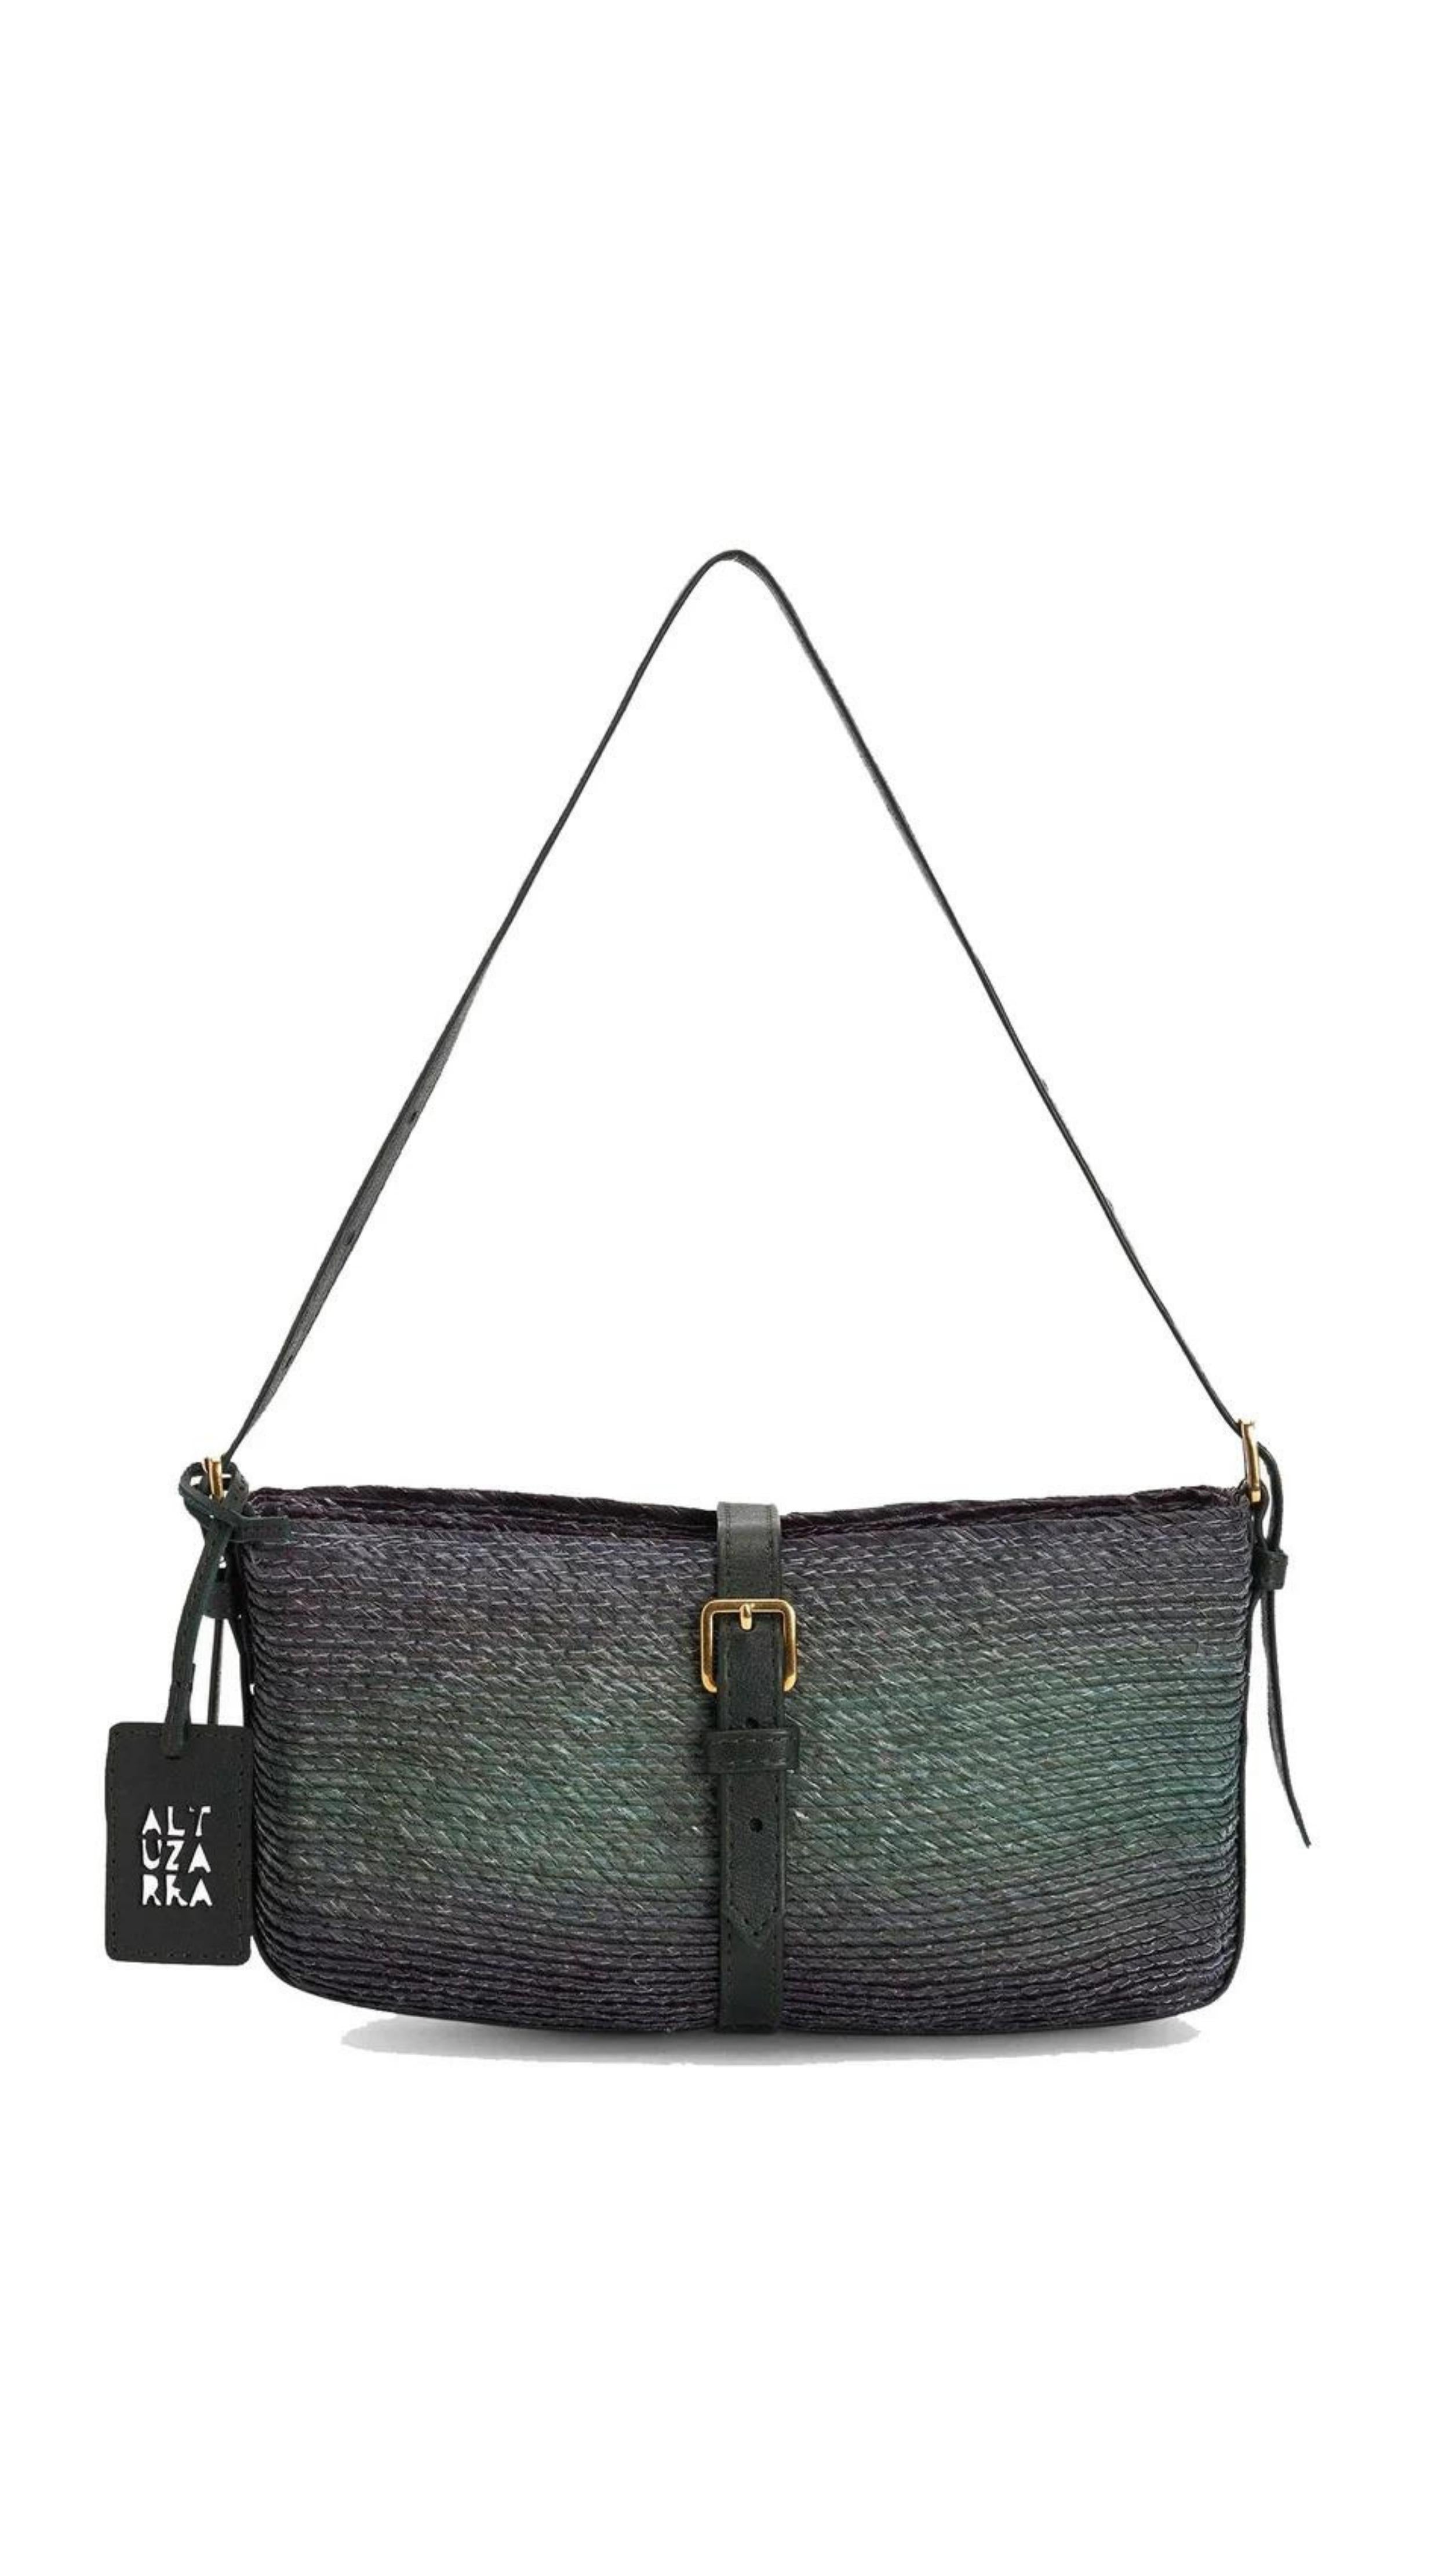 Altuzarra Watermill Shoulder Bag in Campo. Small clutch sized raffia purse in a green and dark blue ombre tone. With navy blue leather details and gold hardware. Photo shown front view. Available at experience 27 in Madrid Spain.